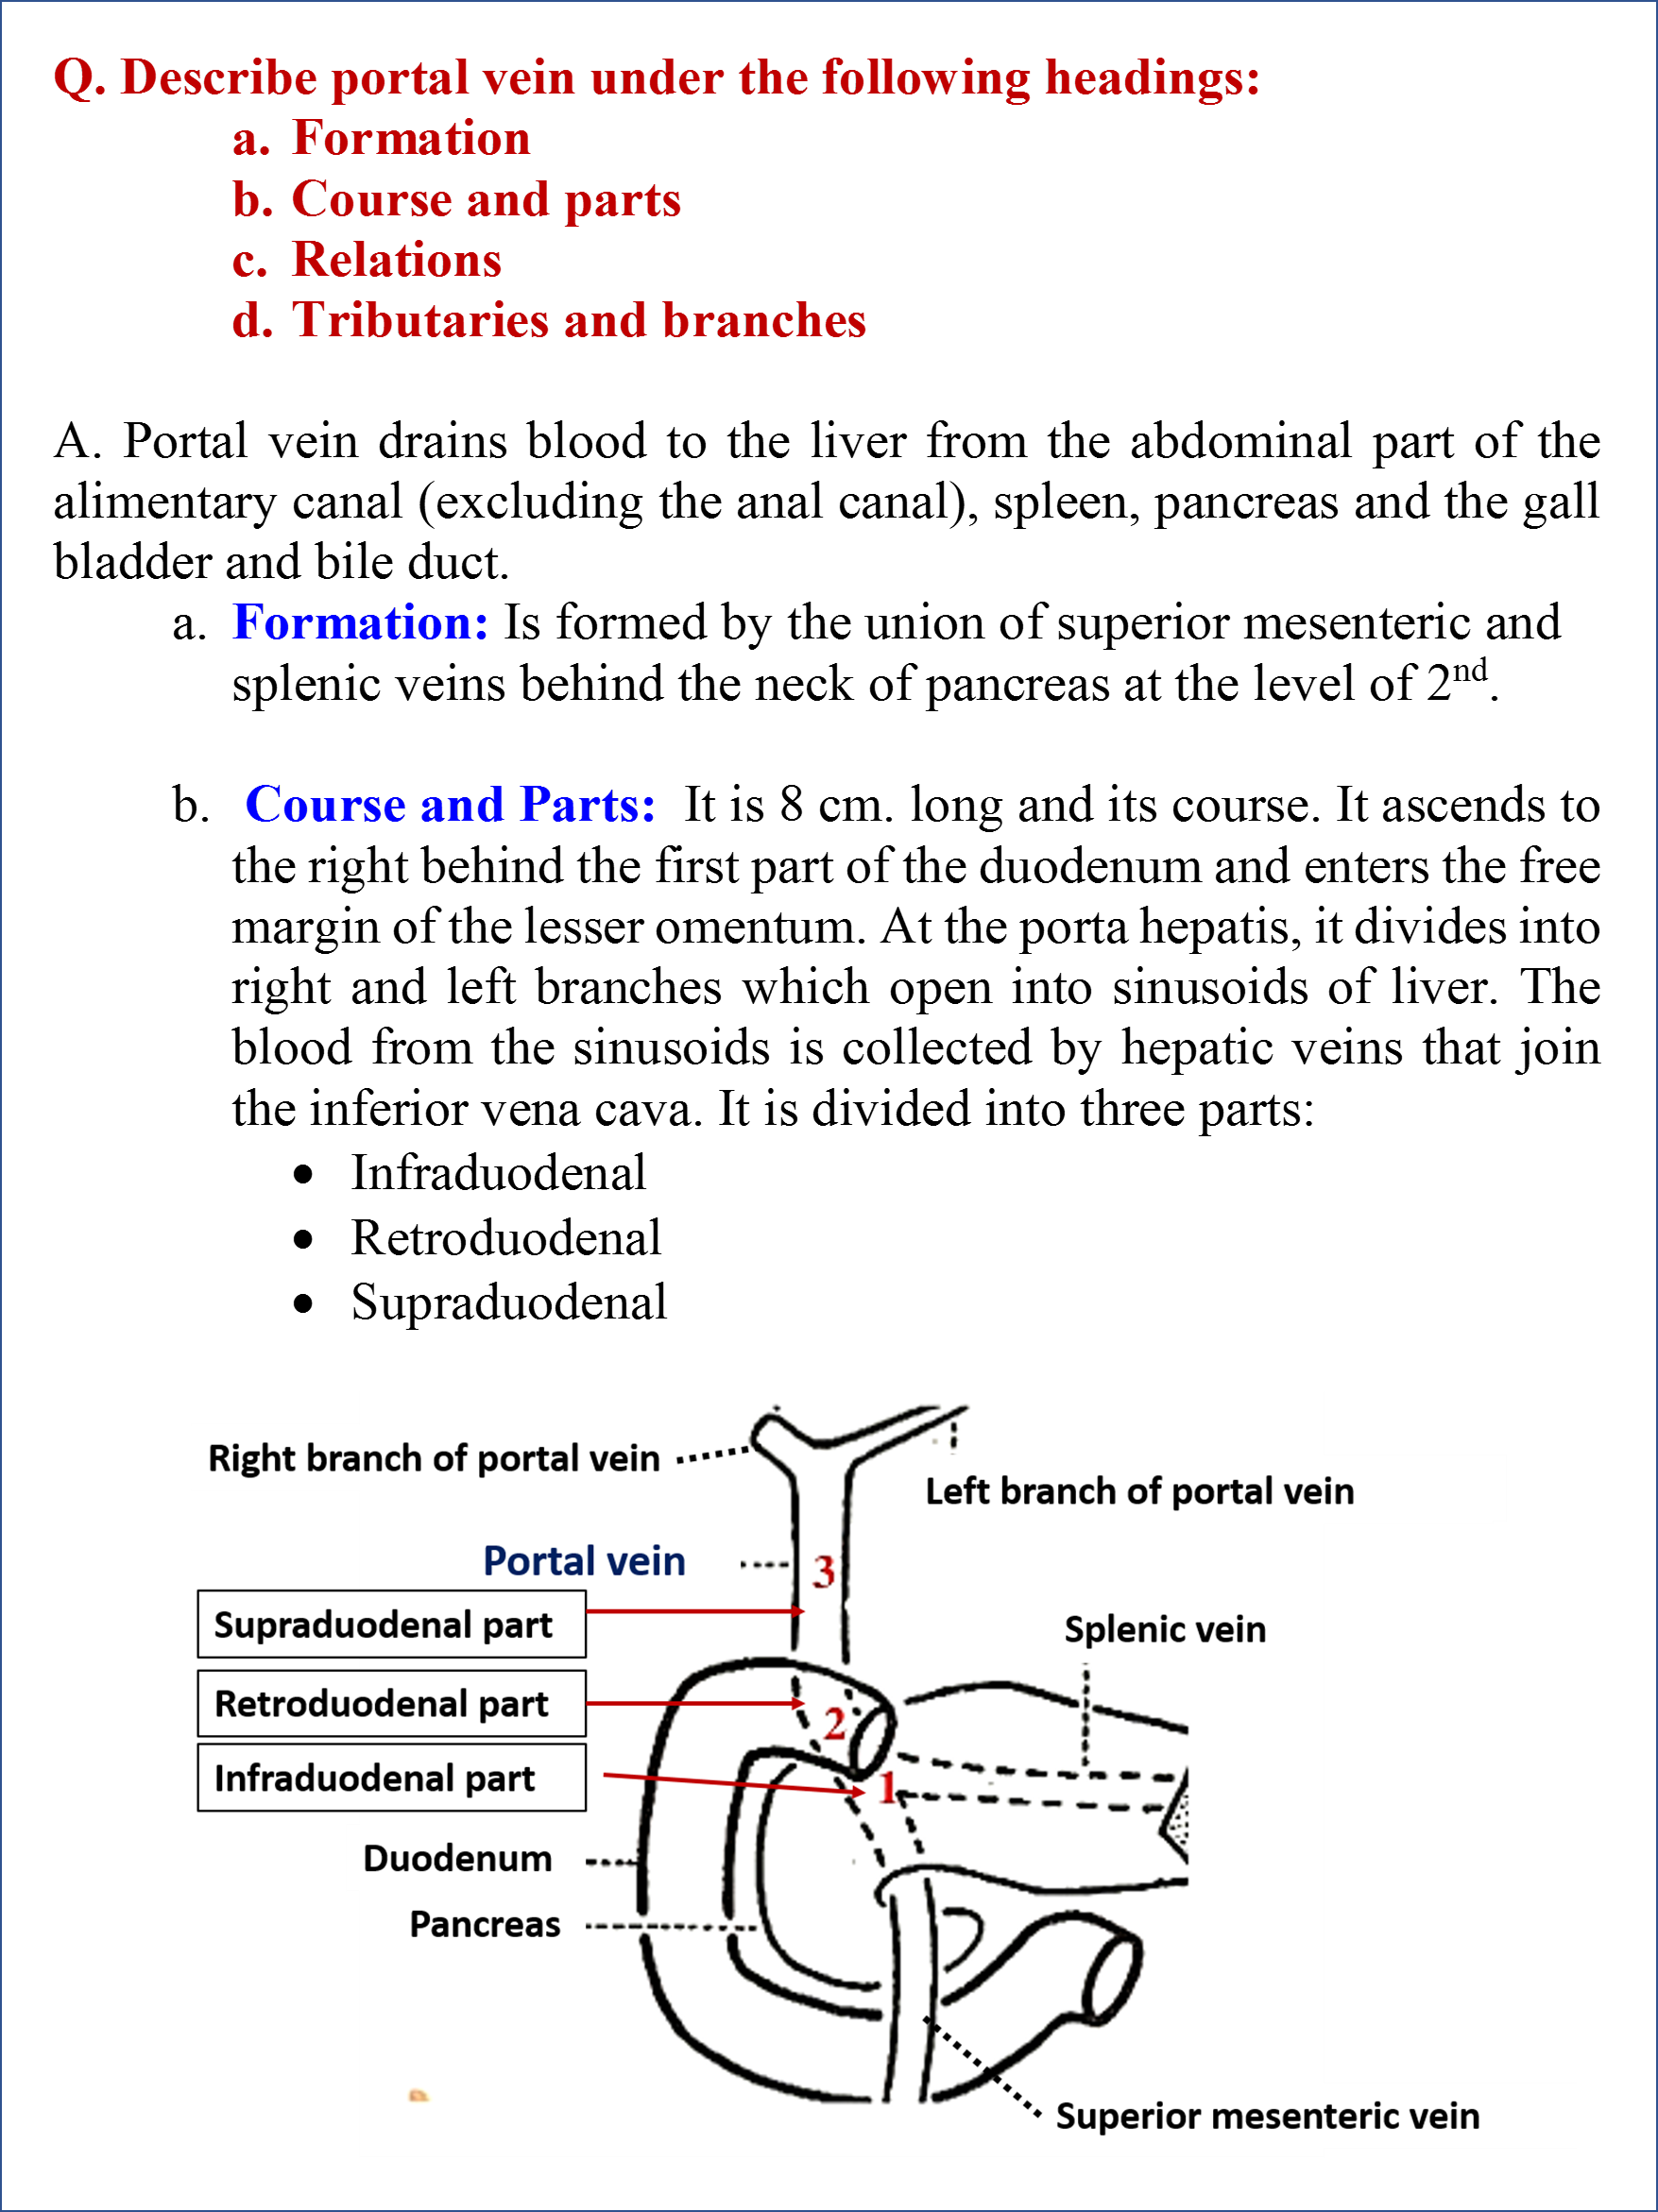 Formation, Course and Parts of  Portal Vein